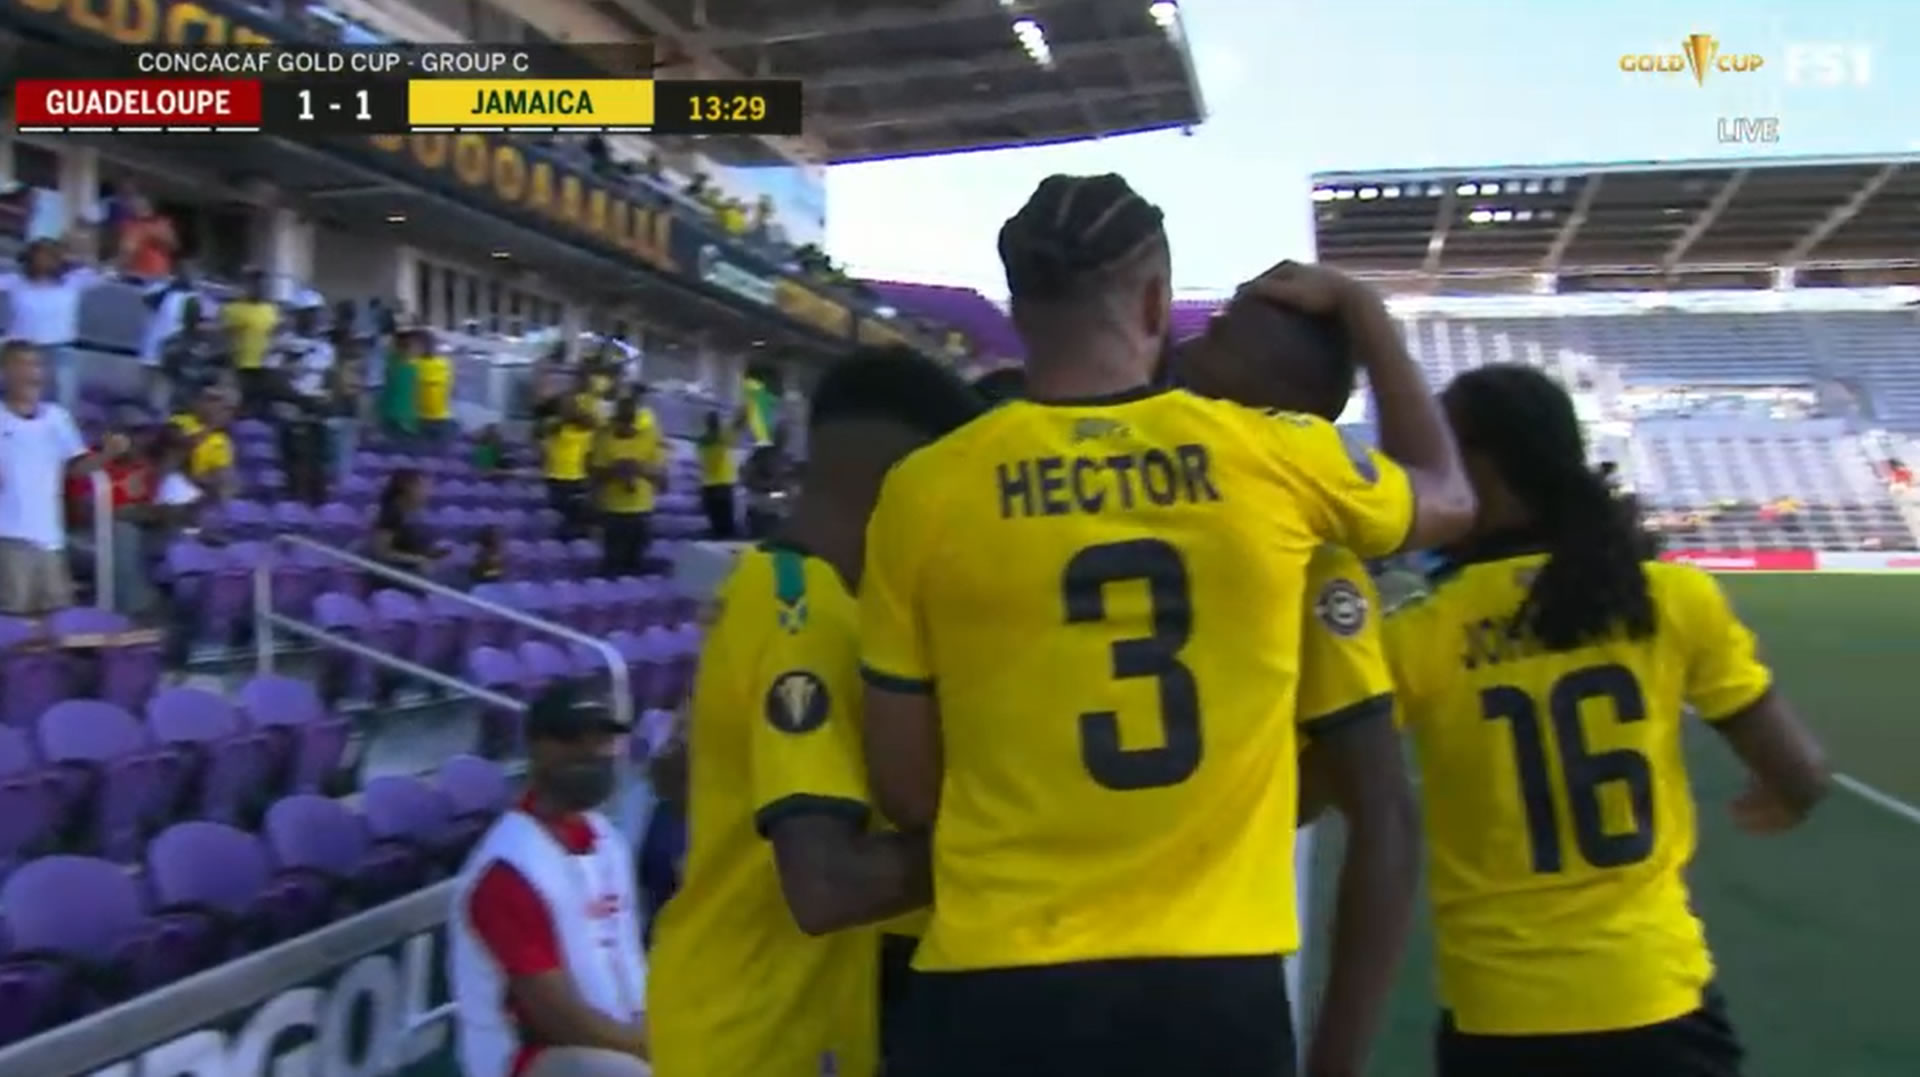 Jamaica scores equalizer 1-1 against Guadeloupe in Gold Cup